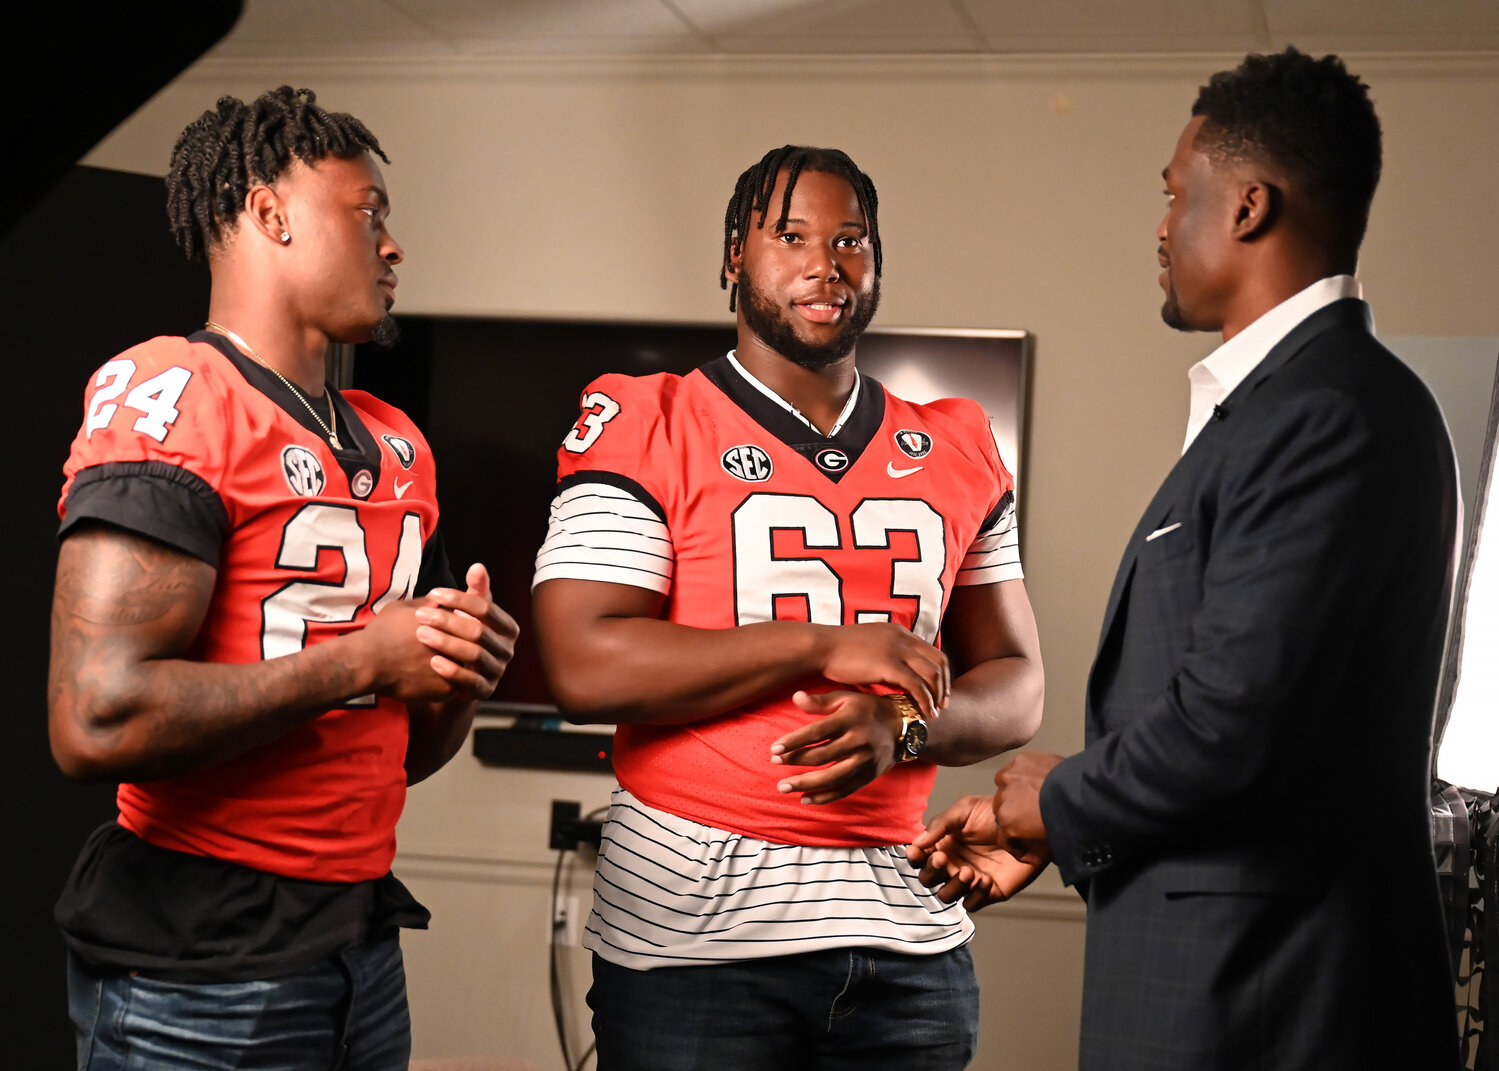 Former UGA player and NFL tight end Ben Watson speaks with current Georgia players Malaki Starks, left, and Sedrick Van Pran prior to a photo opportunity Friday at the Fellowship of Christian Athletes UGA Night of Champions event at First Baptist Church of Woodstock. (Index/Henry Durand)